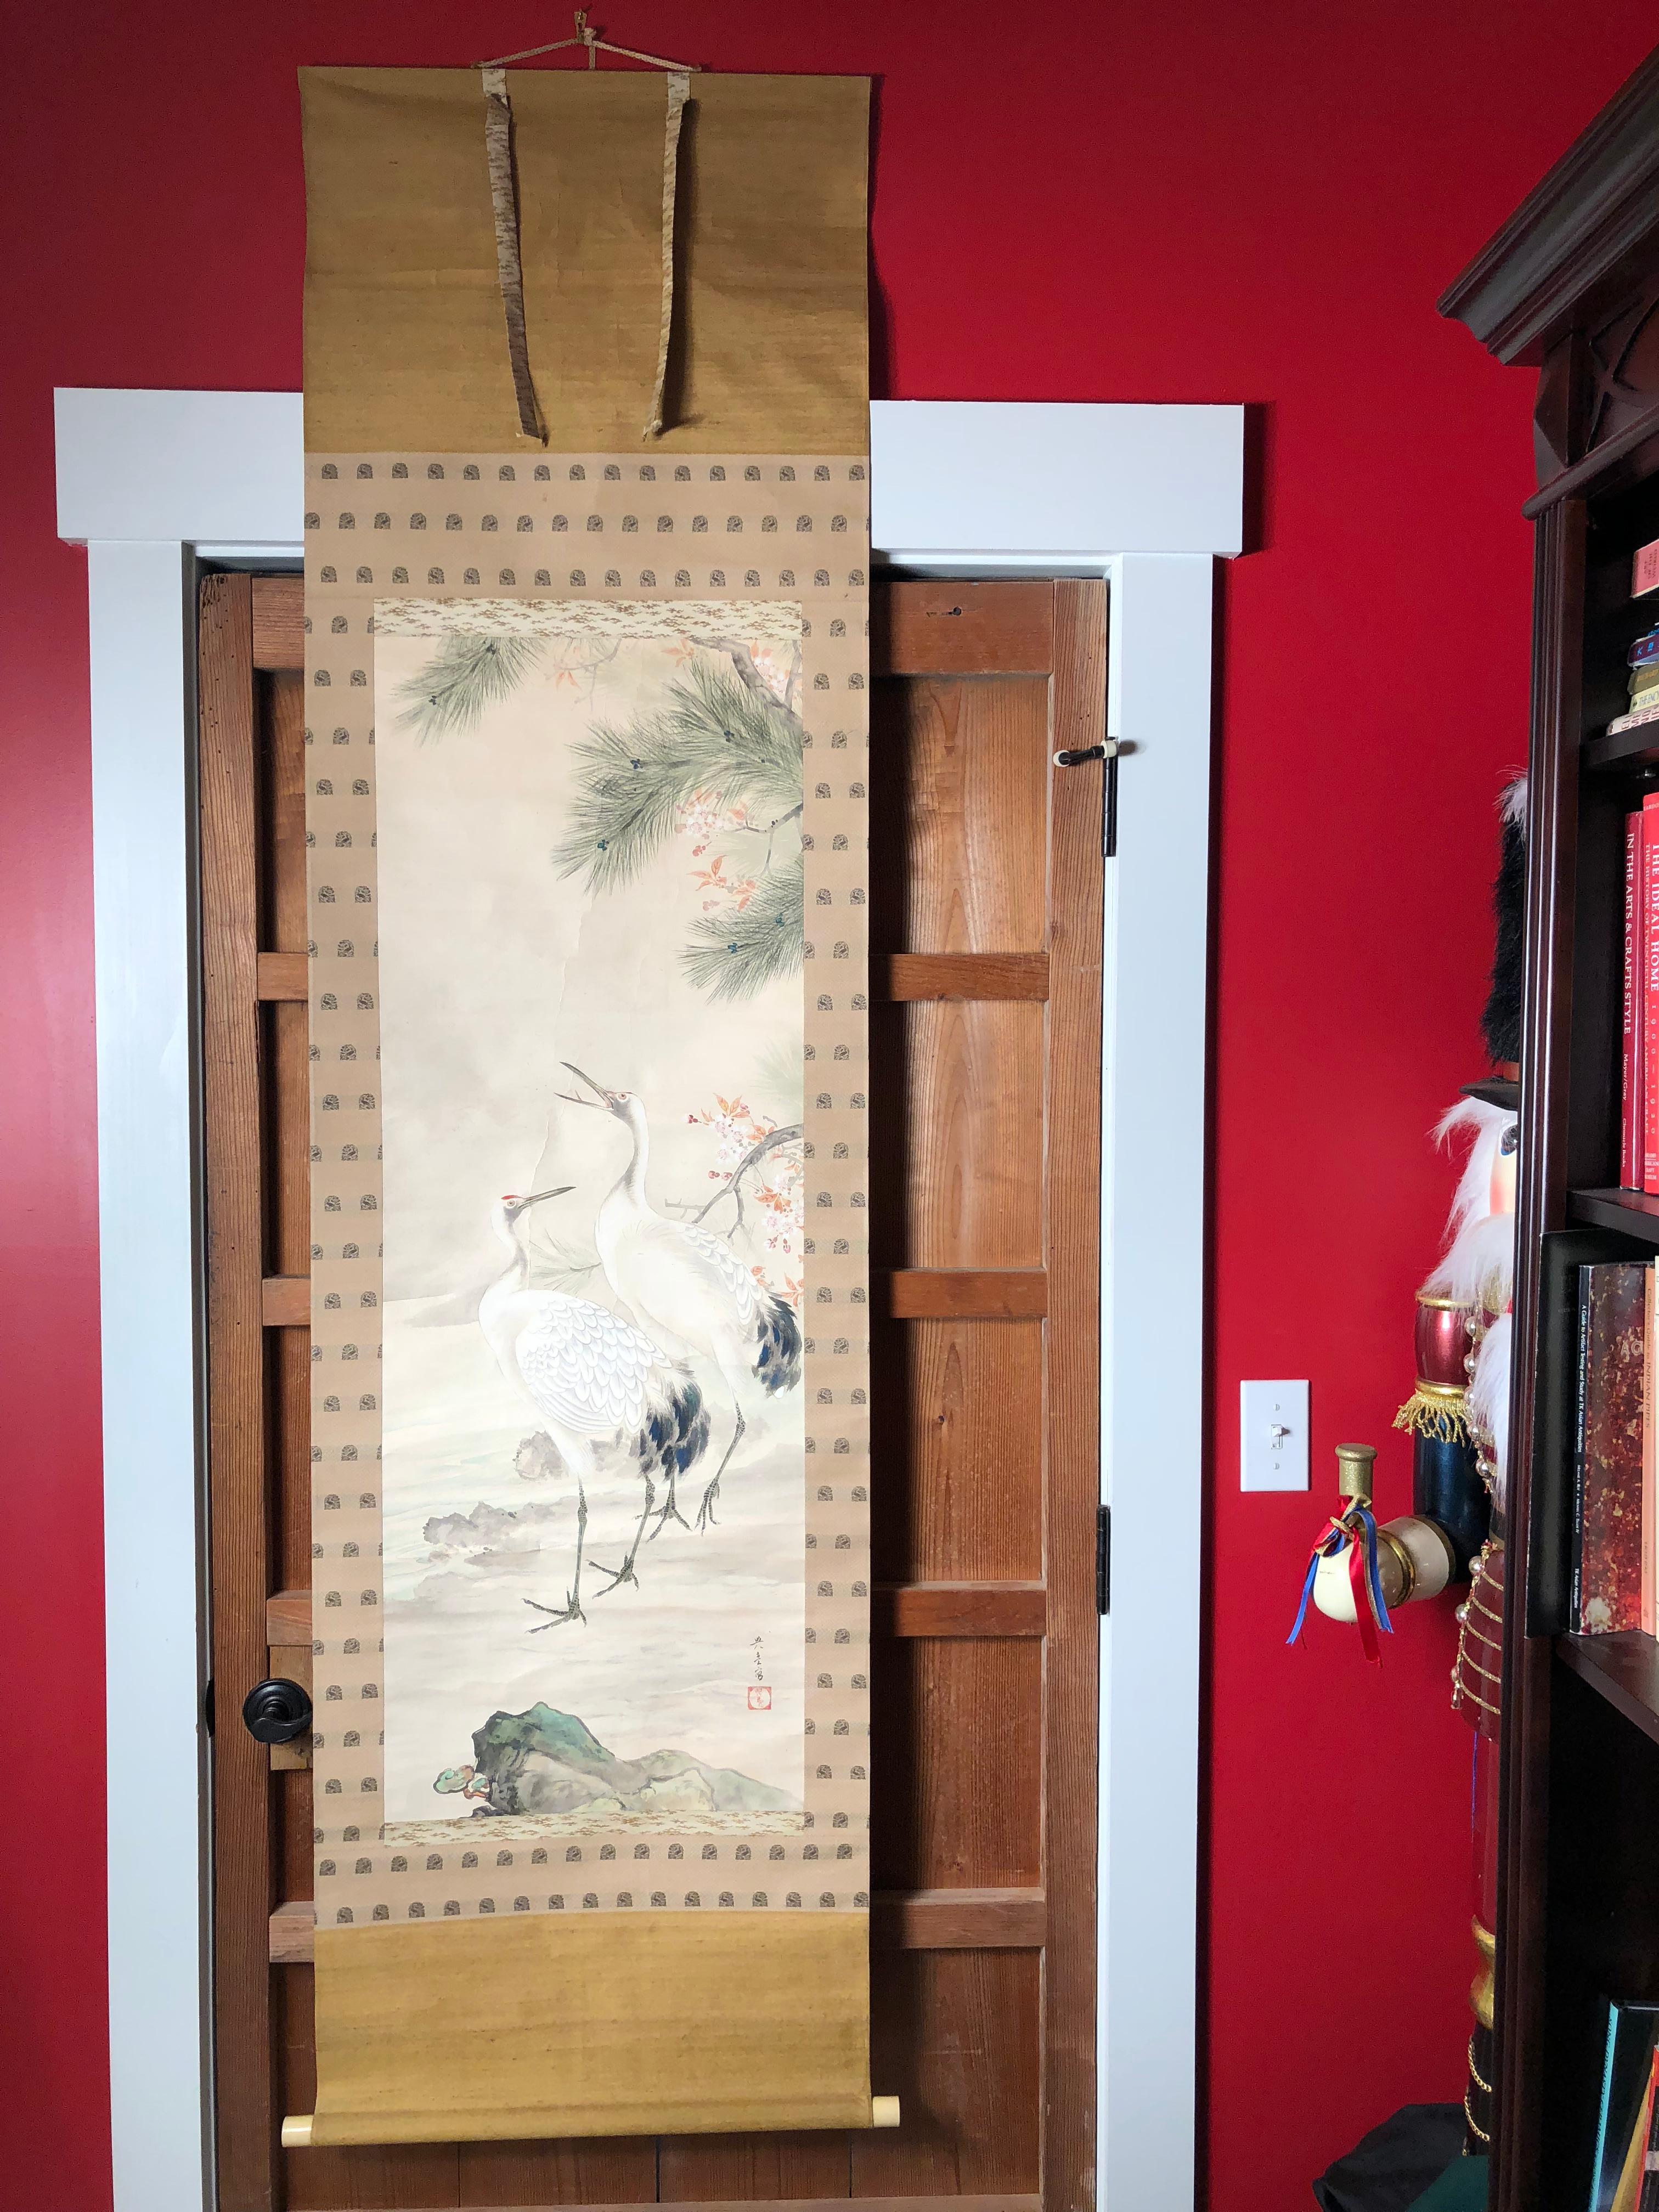 A beautiful antique free hand rendition of a Japanese hand-printed scroll of a conjugal pair of cranes, pine trees and flowering plumb tree, - scroll worthy of your favorite room.

Hand painting on silk in simple classic Japanese striking soft